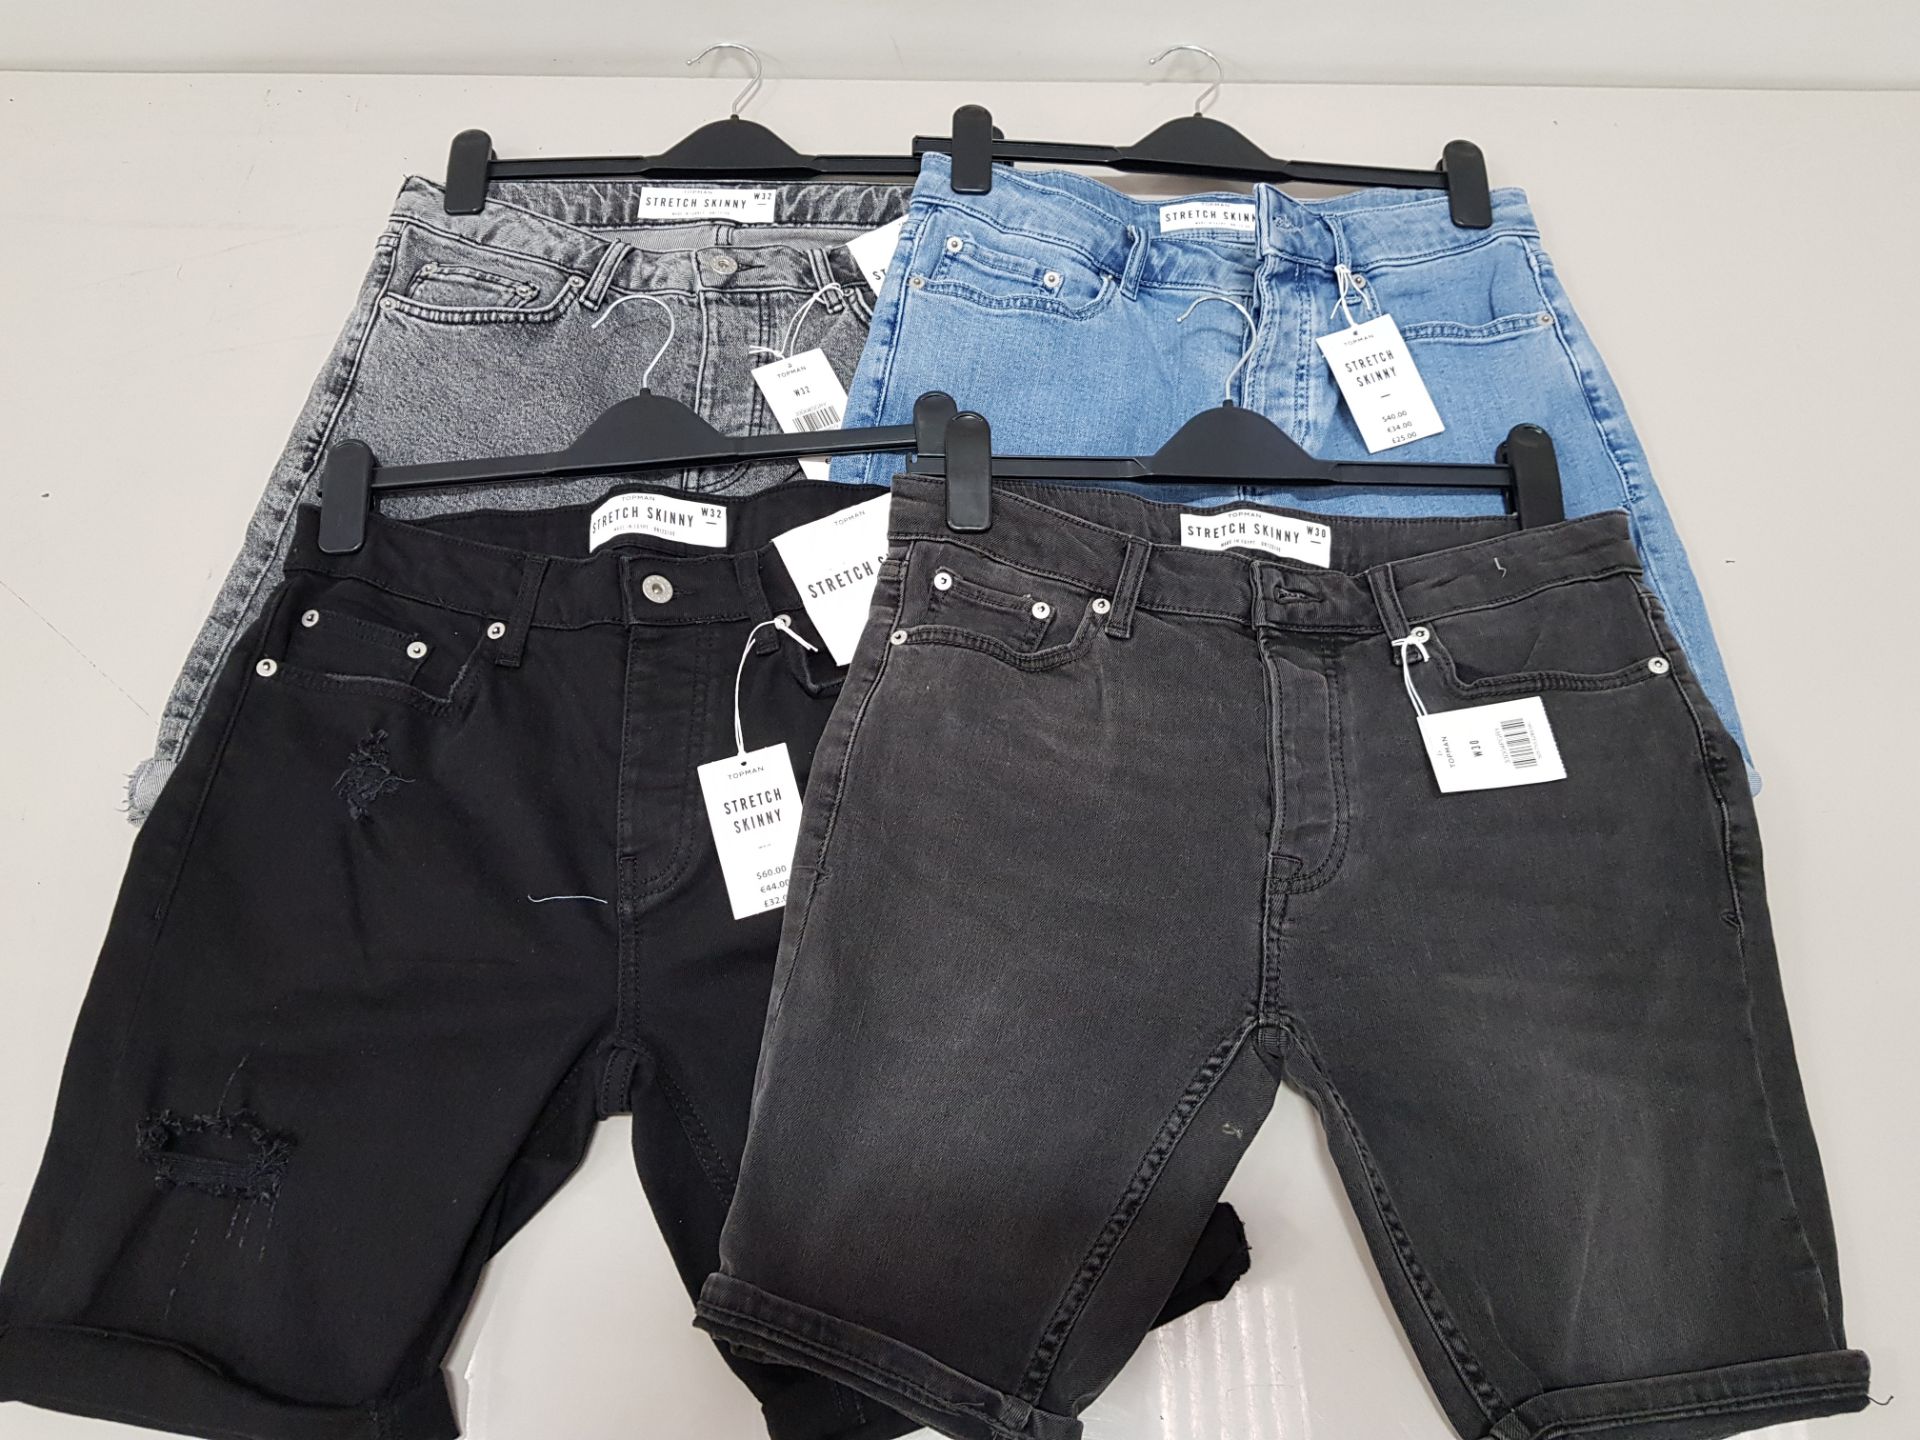 APPROX 43 X BRAND NEW TOPMAN DENIM SHORTS IN VARIOUS DIFFERENT COLOURS AND SIZES